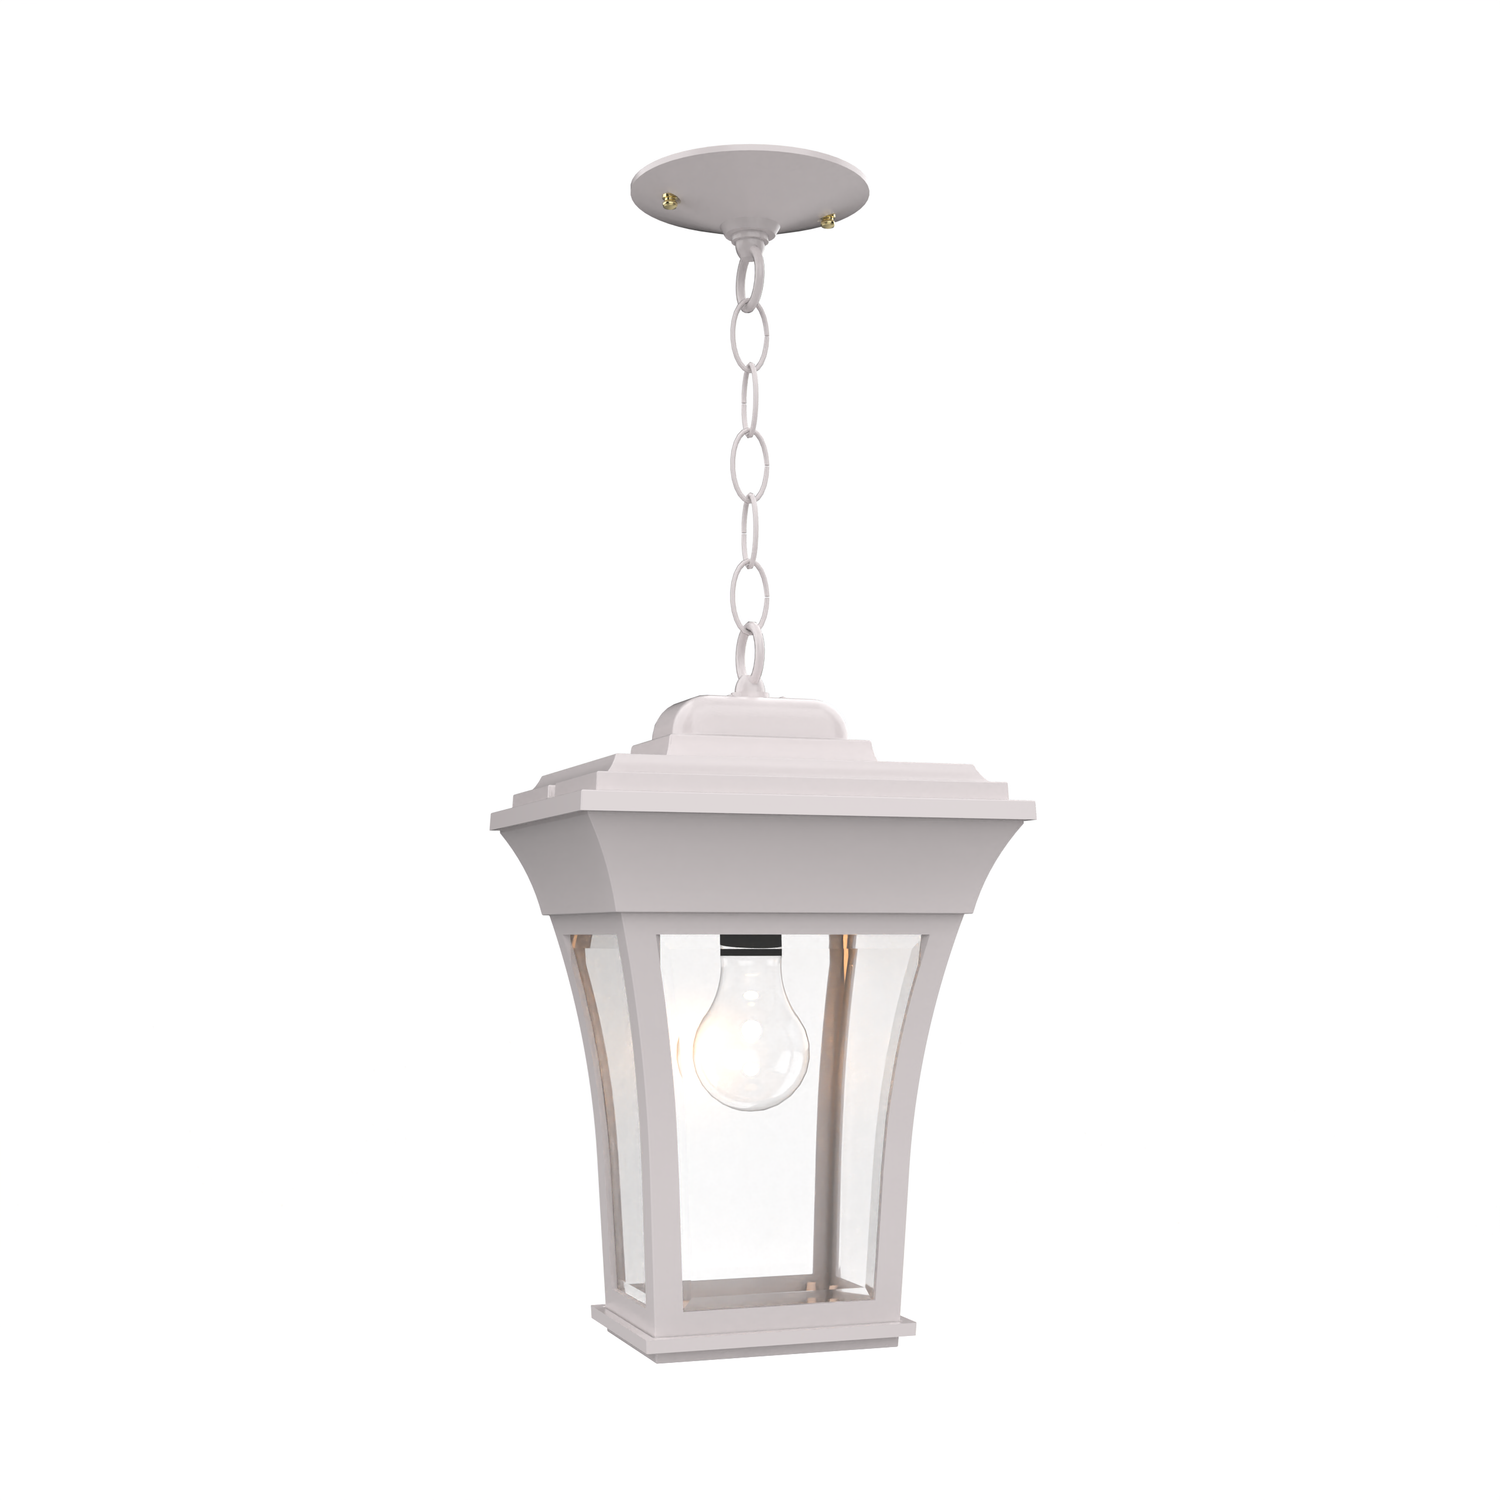 Accord - Ceiling mounting with chain - 81507